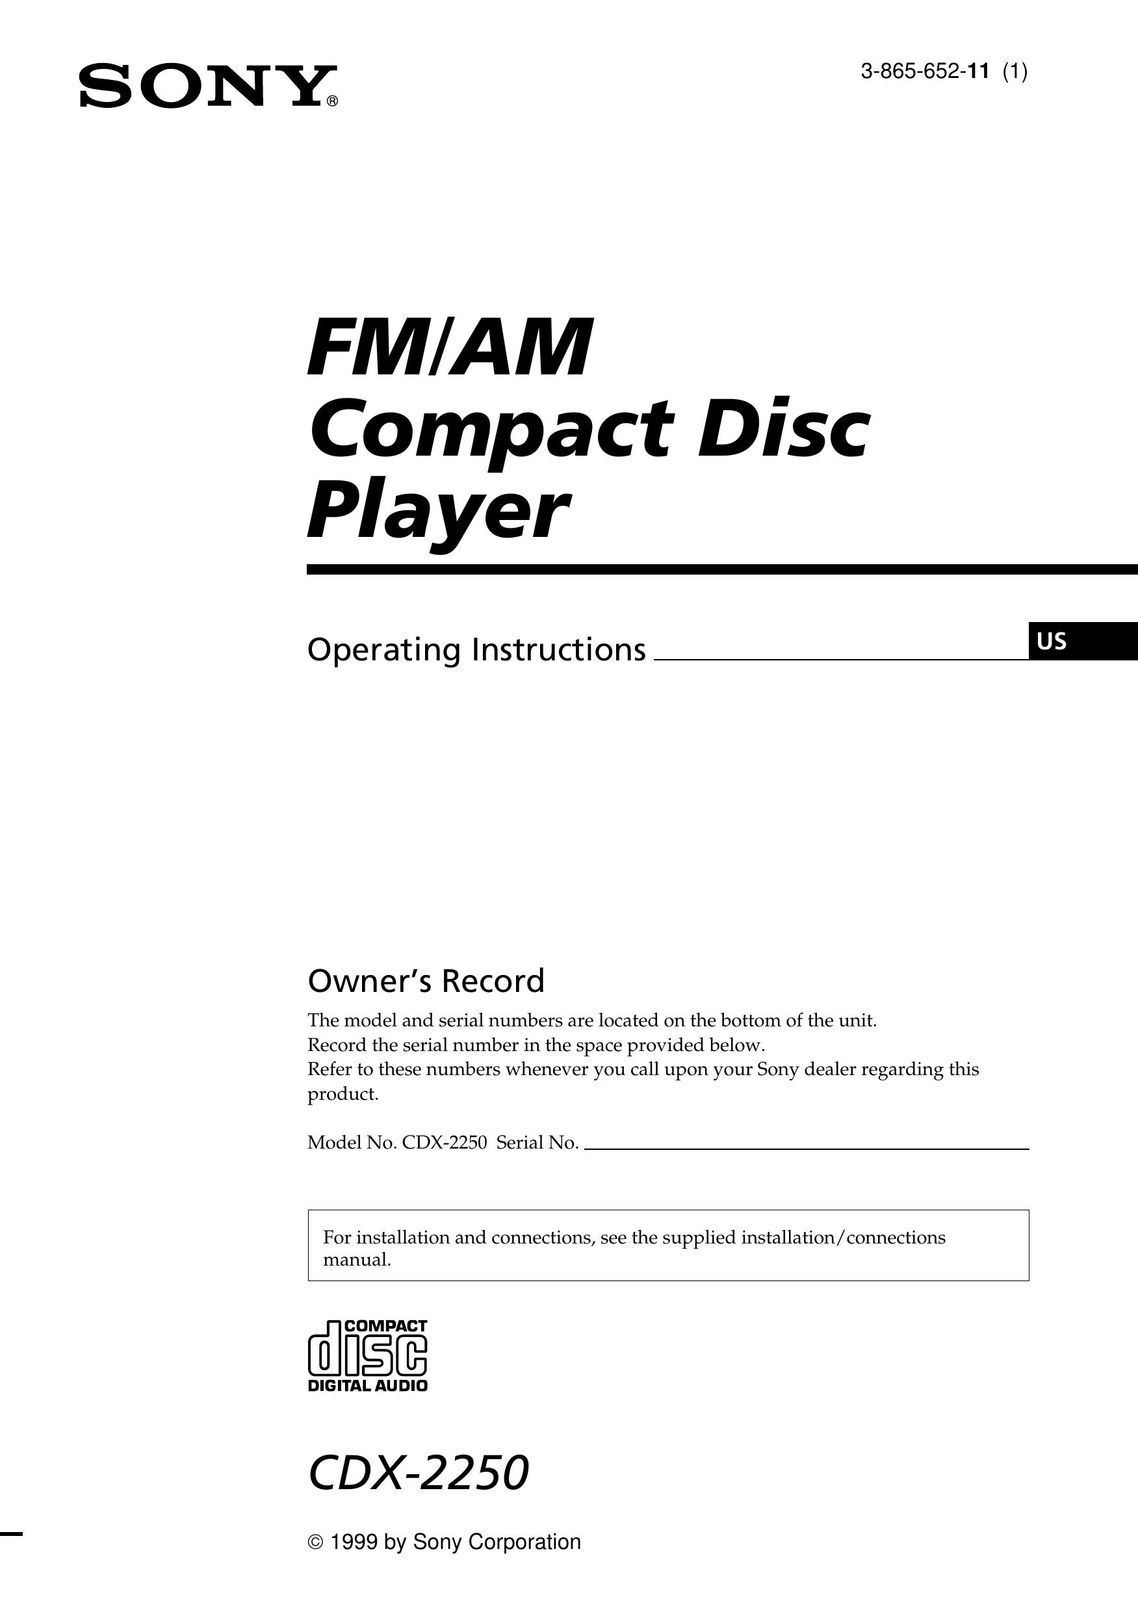 Sony CDX-2250 Portable CD Player User Manual